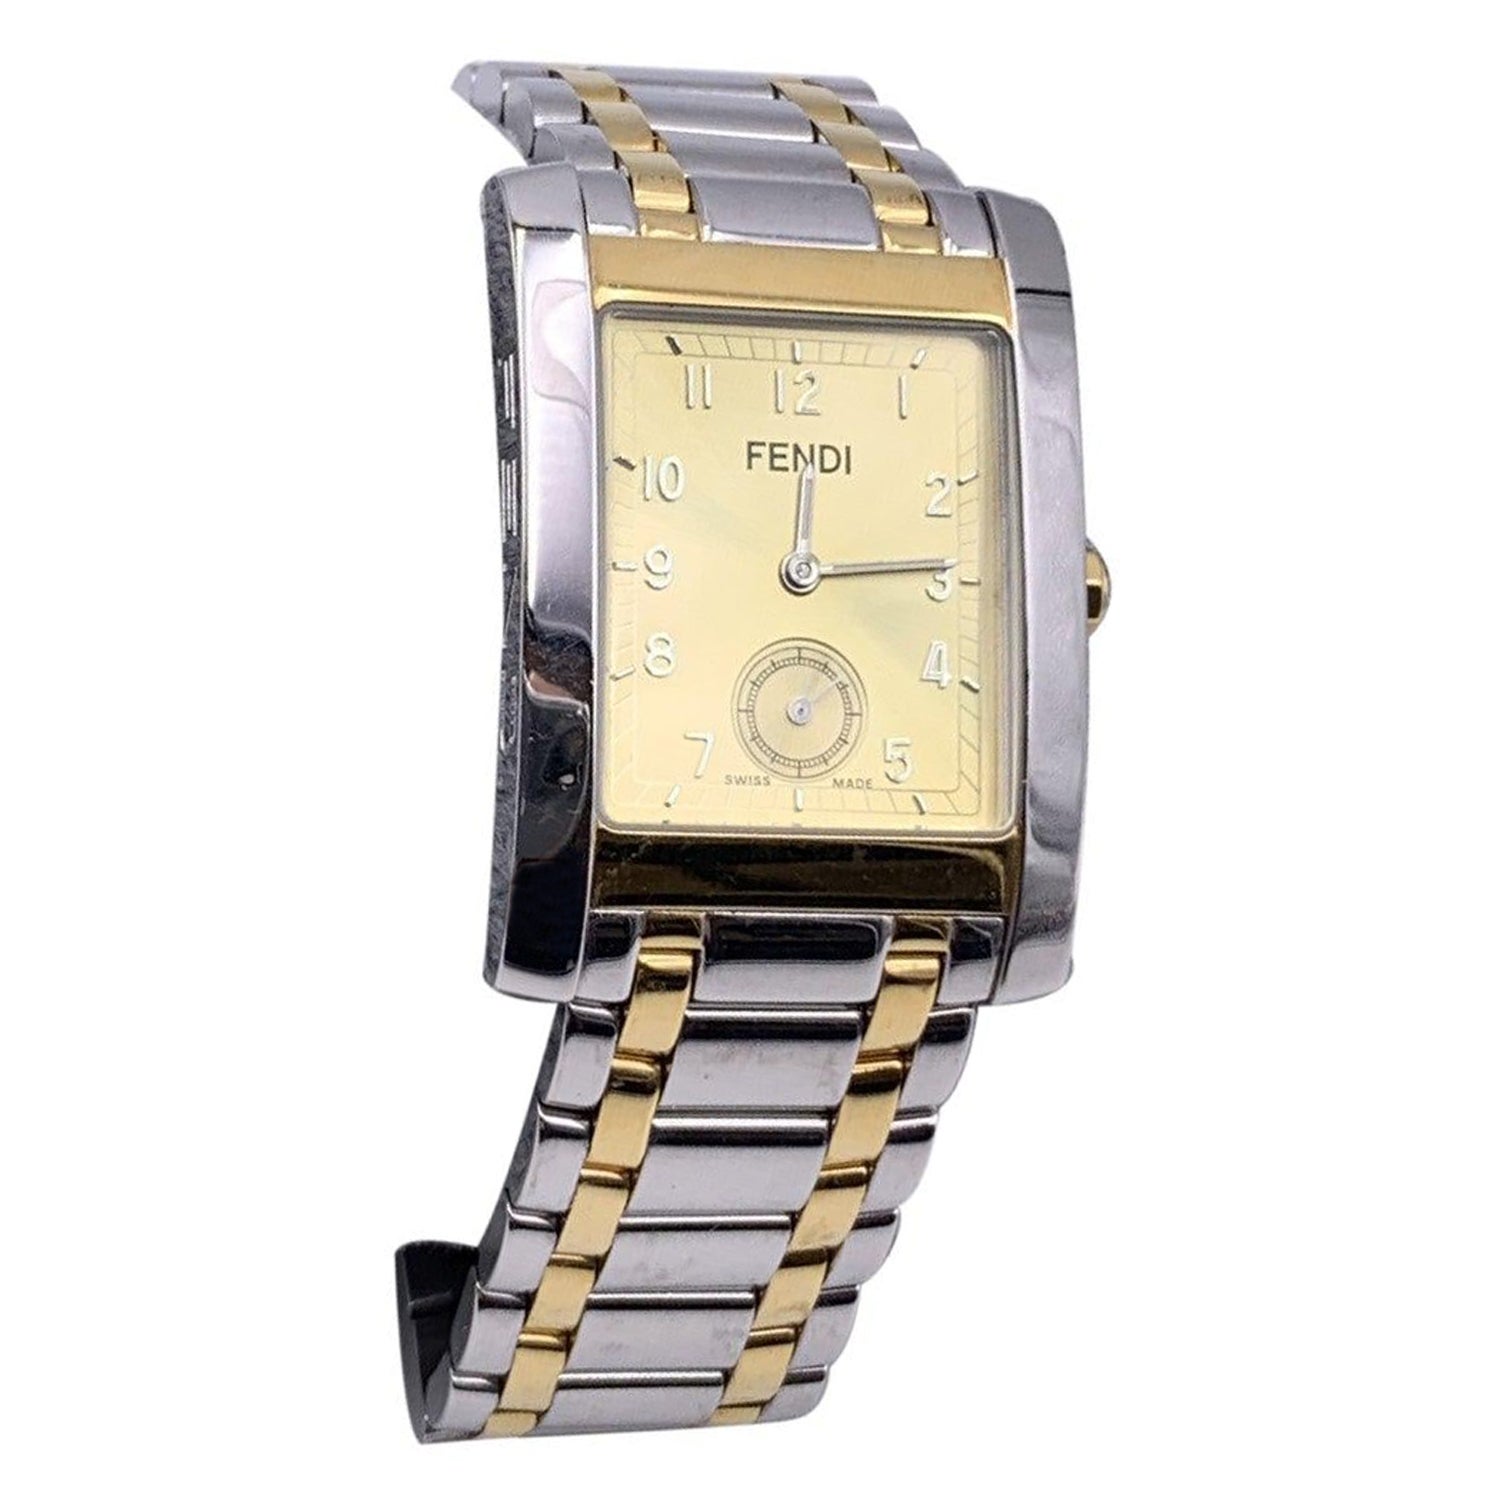 Fendi Gold and Silver Stainless Steel 7000 G Wrist Watch Rectangular